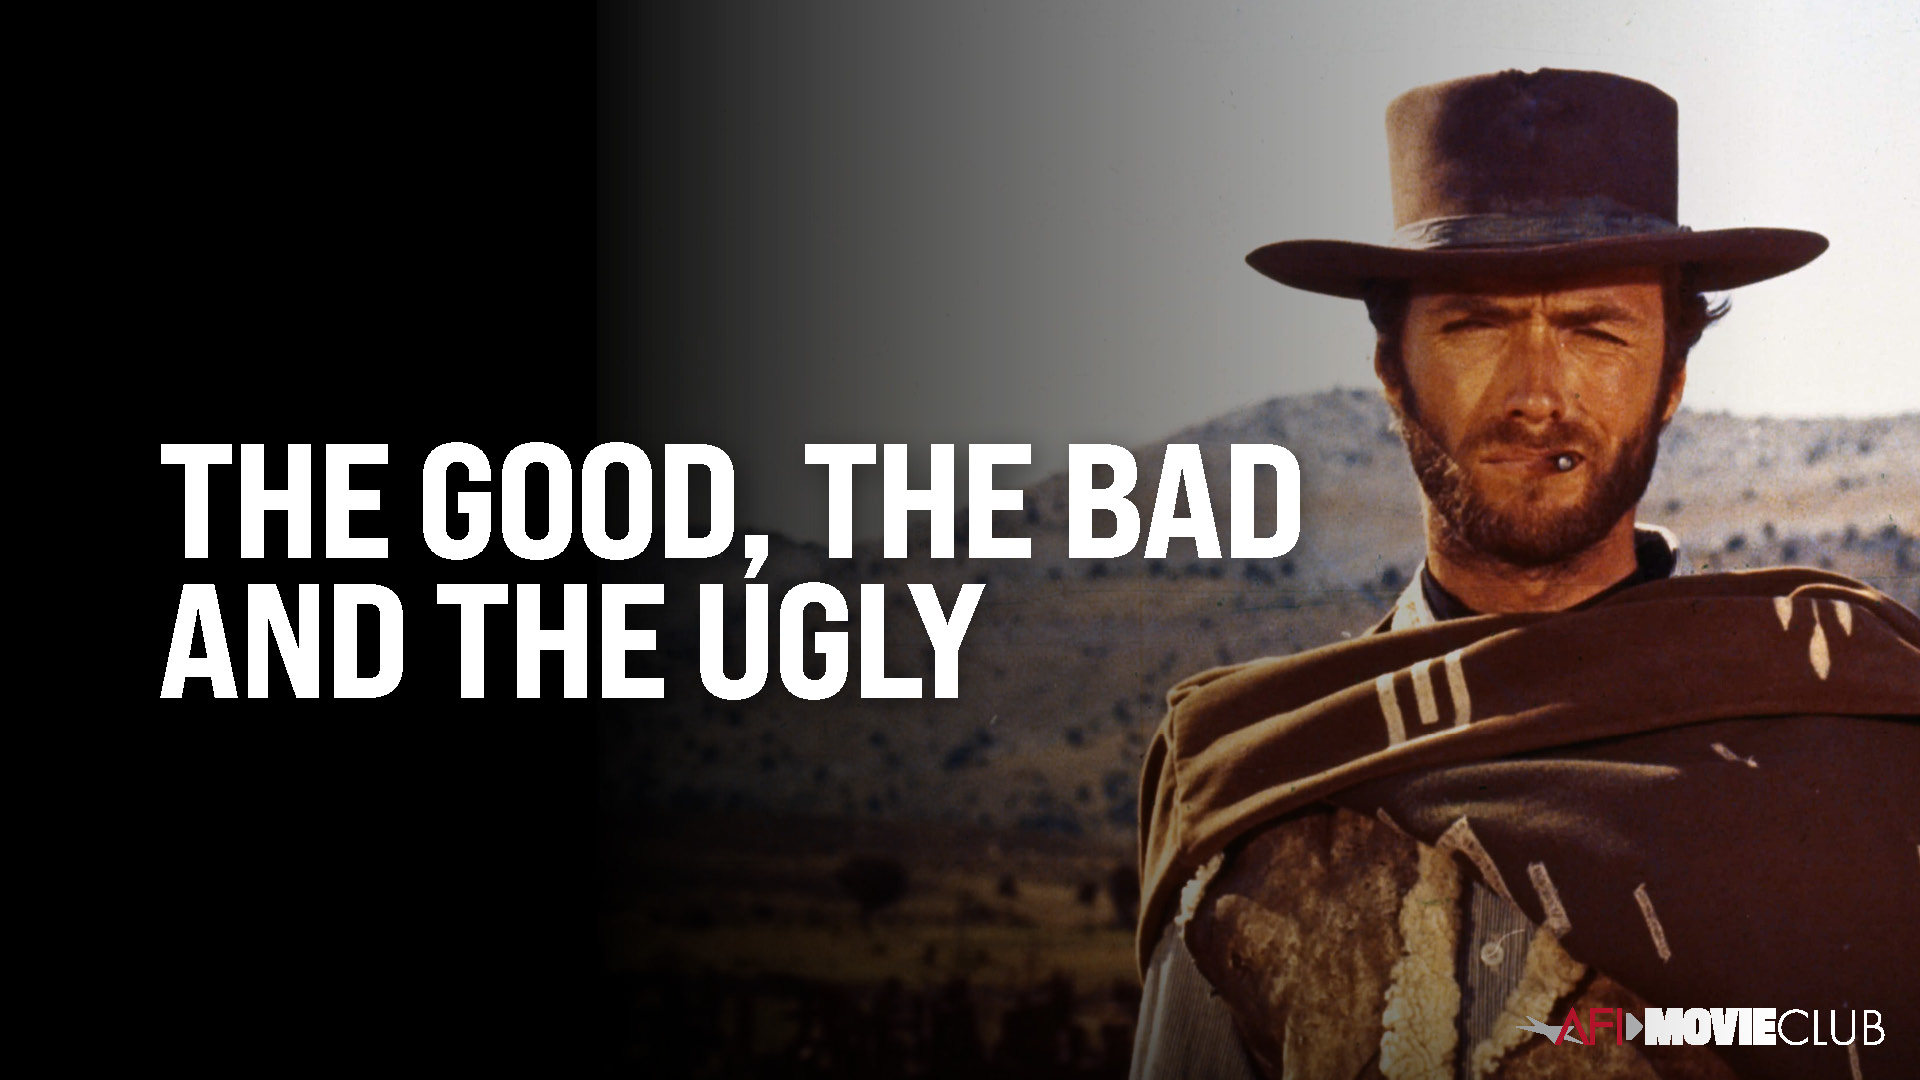 The Good, the Bad, and the Ugly Film Still - Clint Eastwood